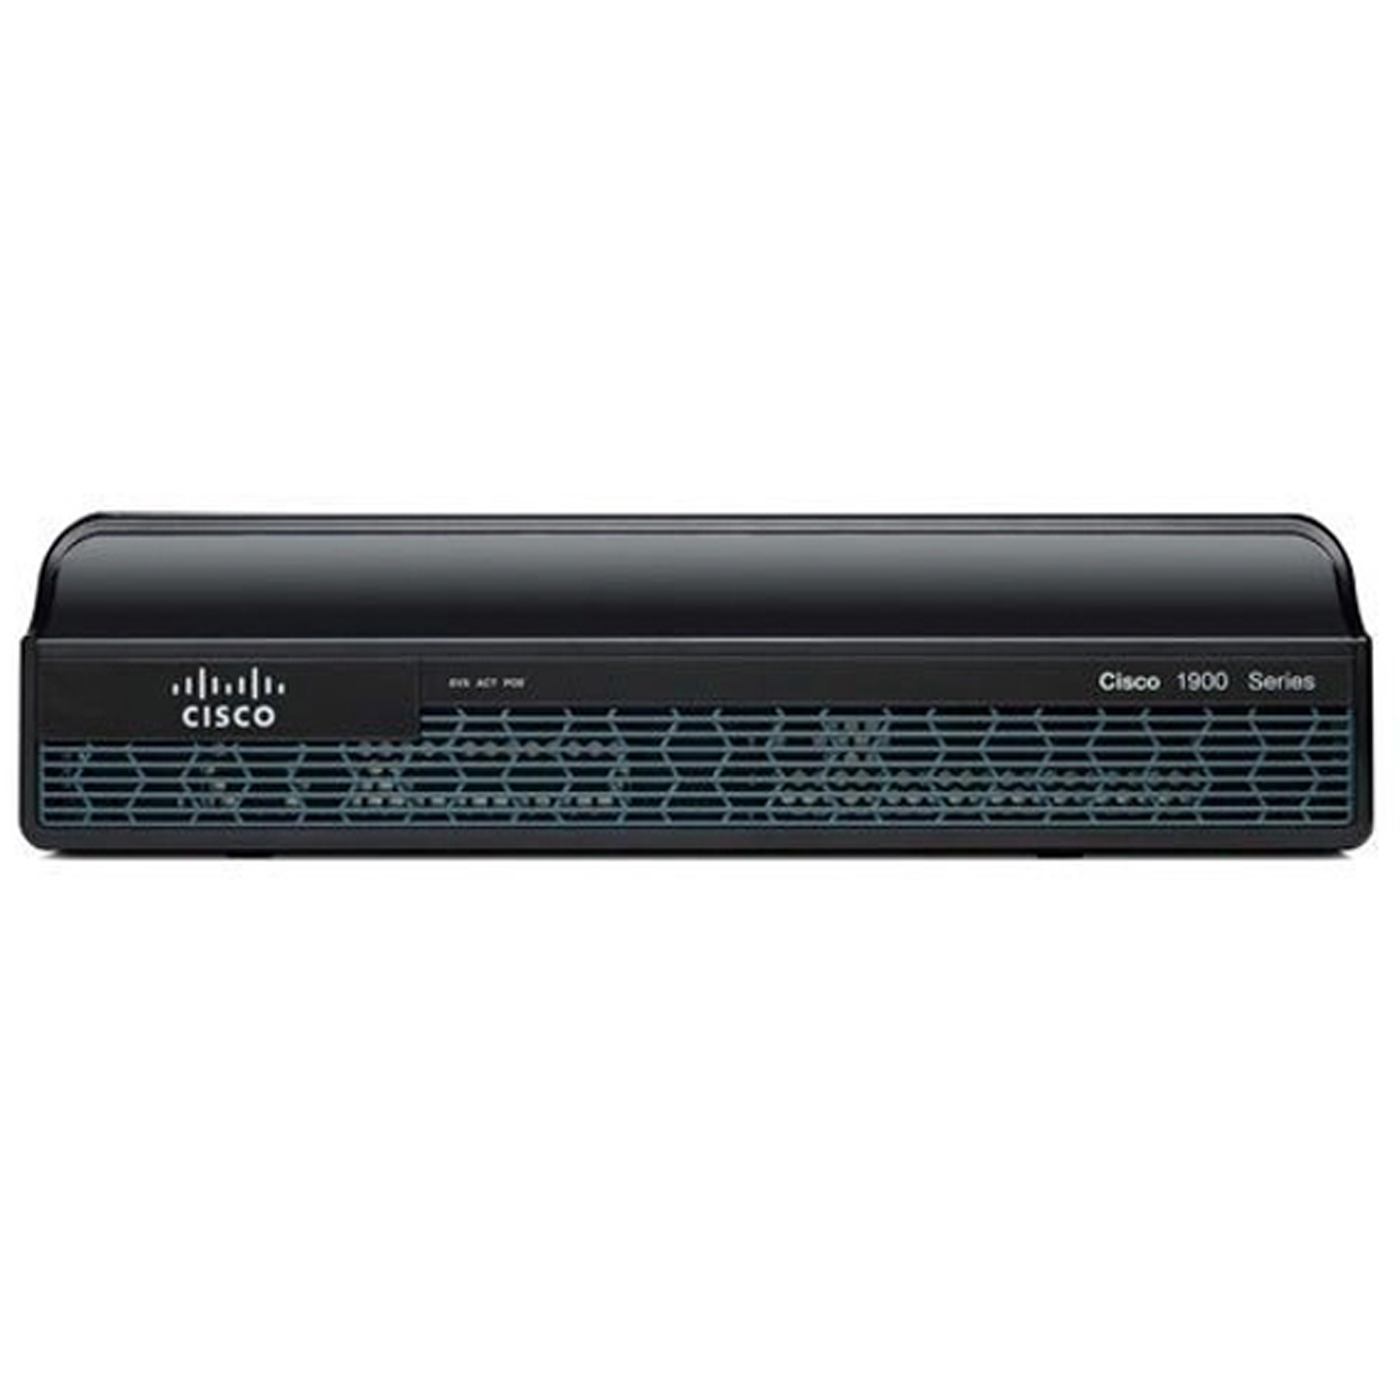 Refurbished and Used cisco 1900 series router